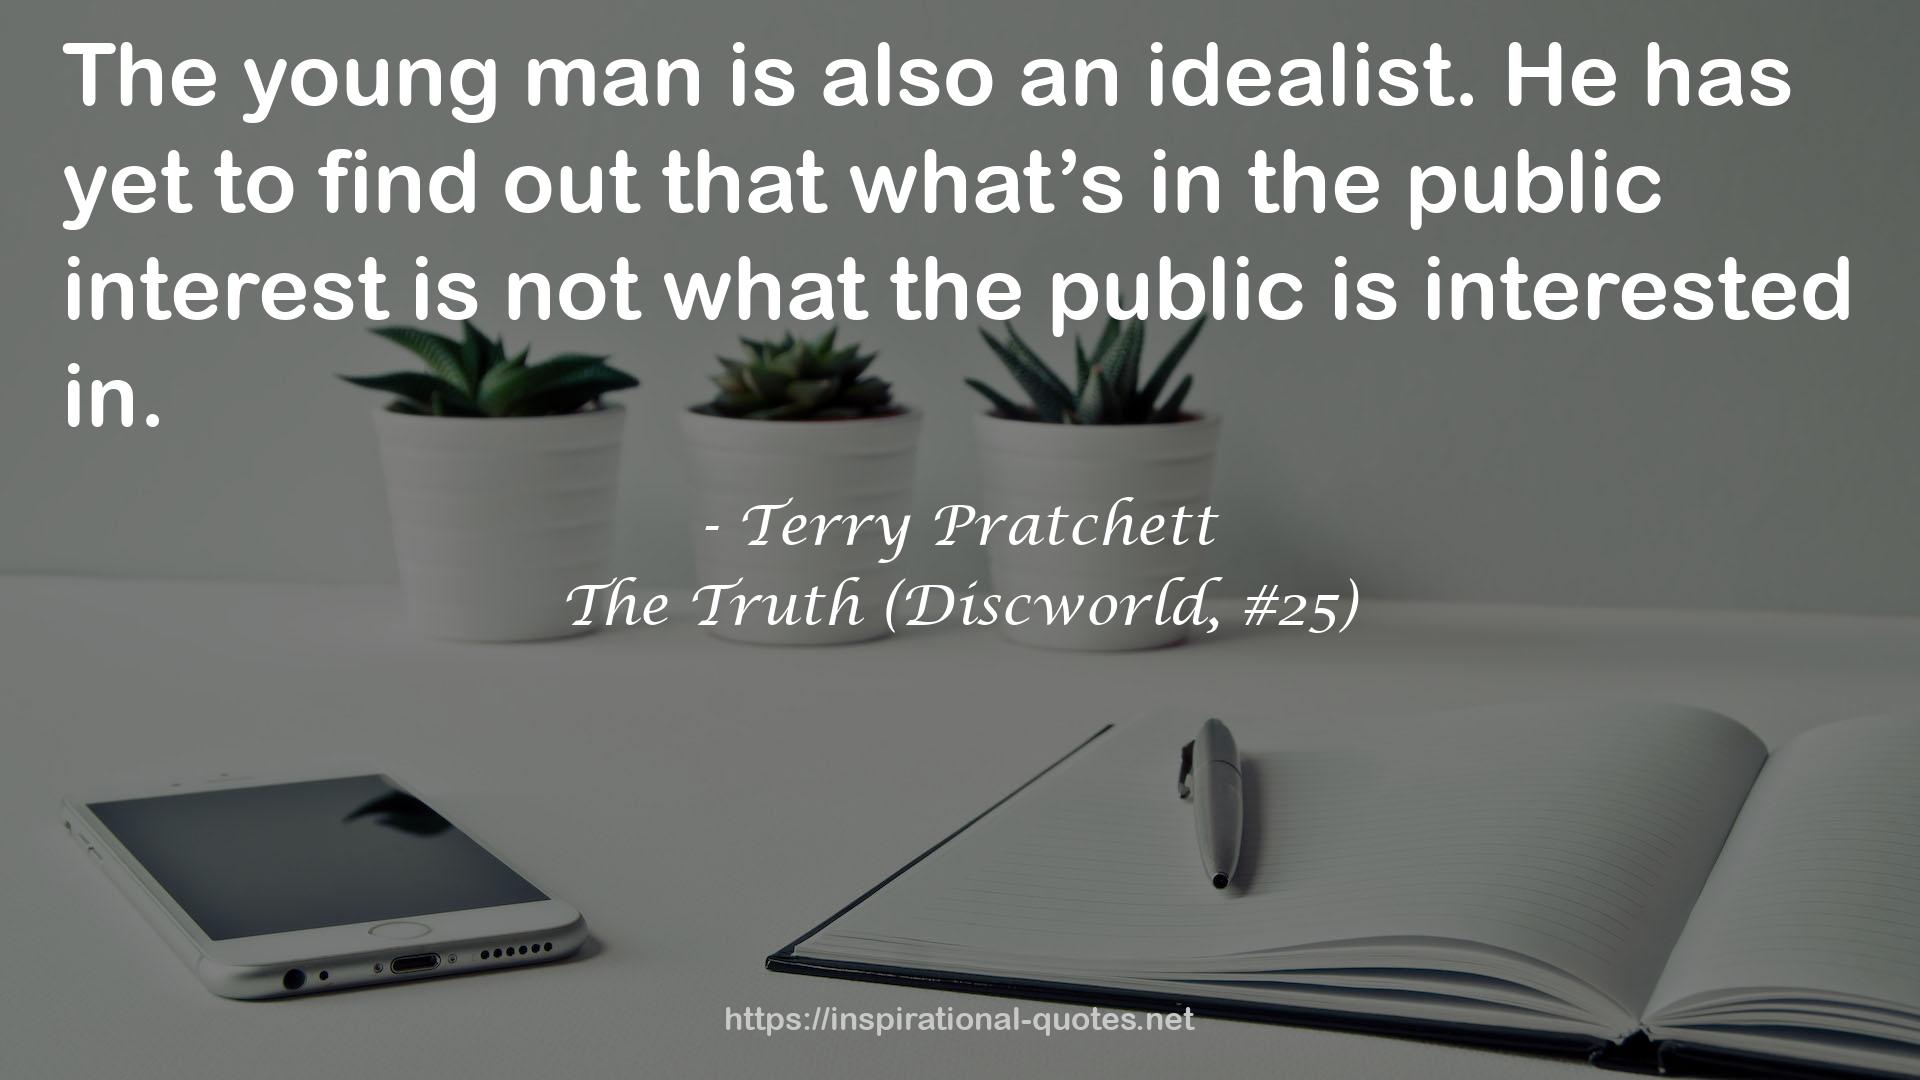 The Truth (Discworld, #25) QUOTES